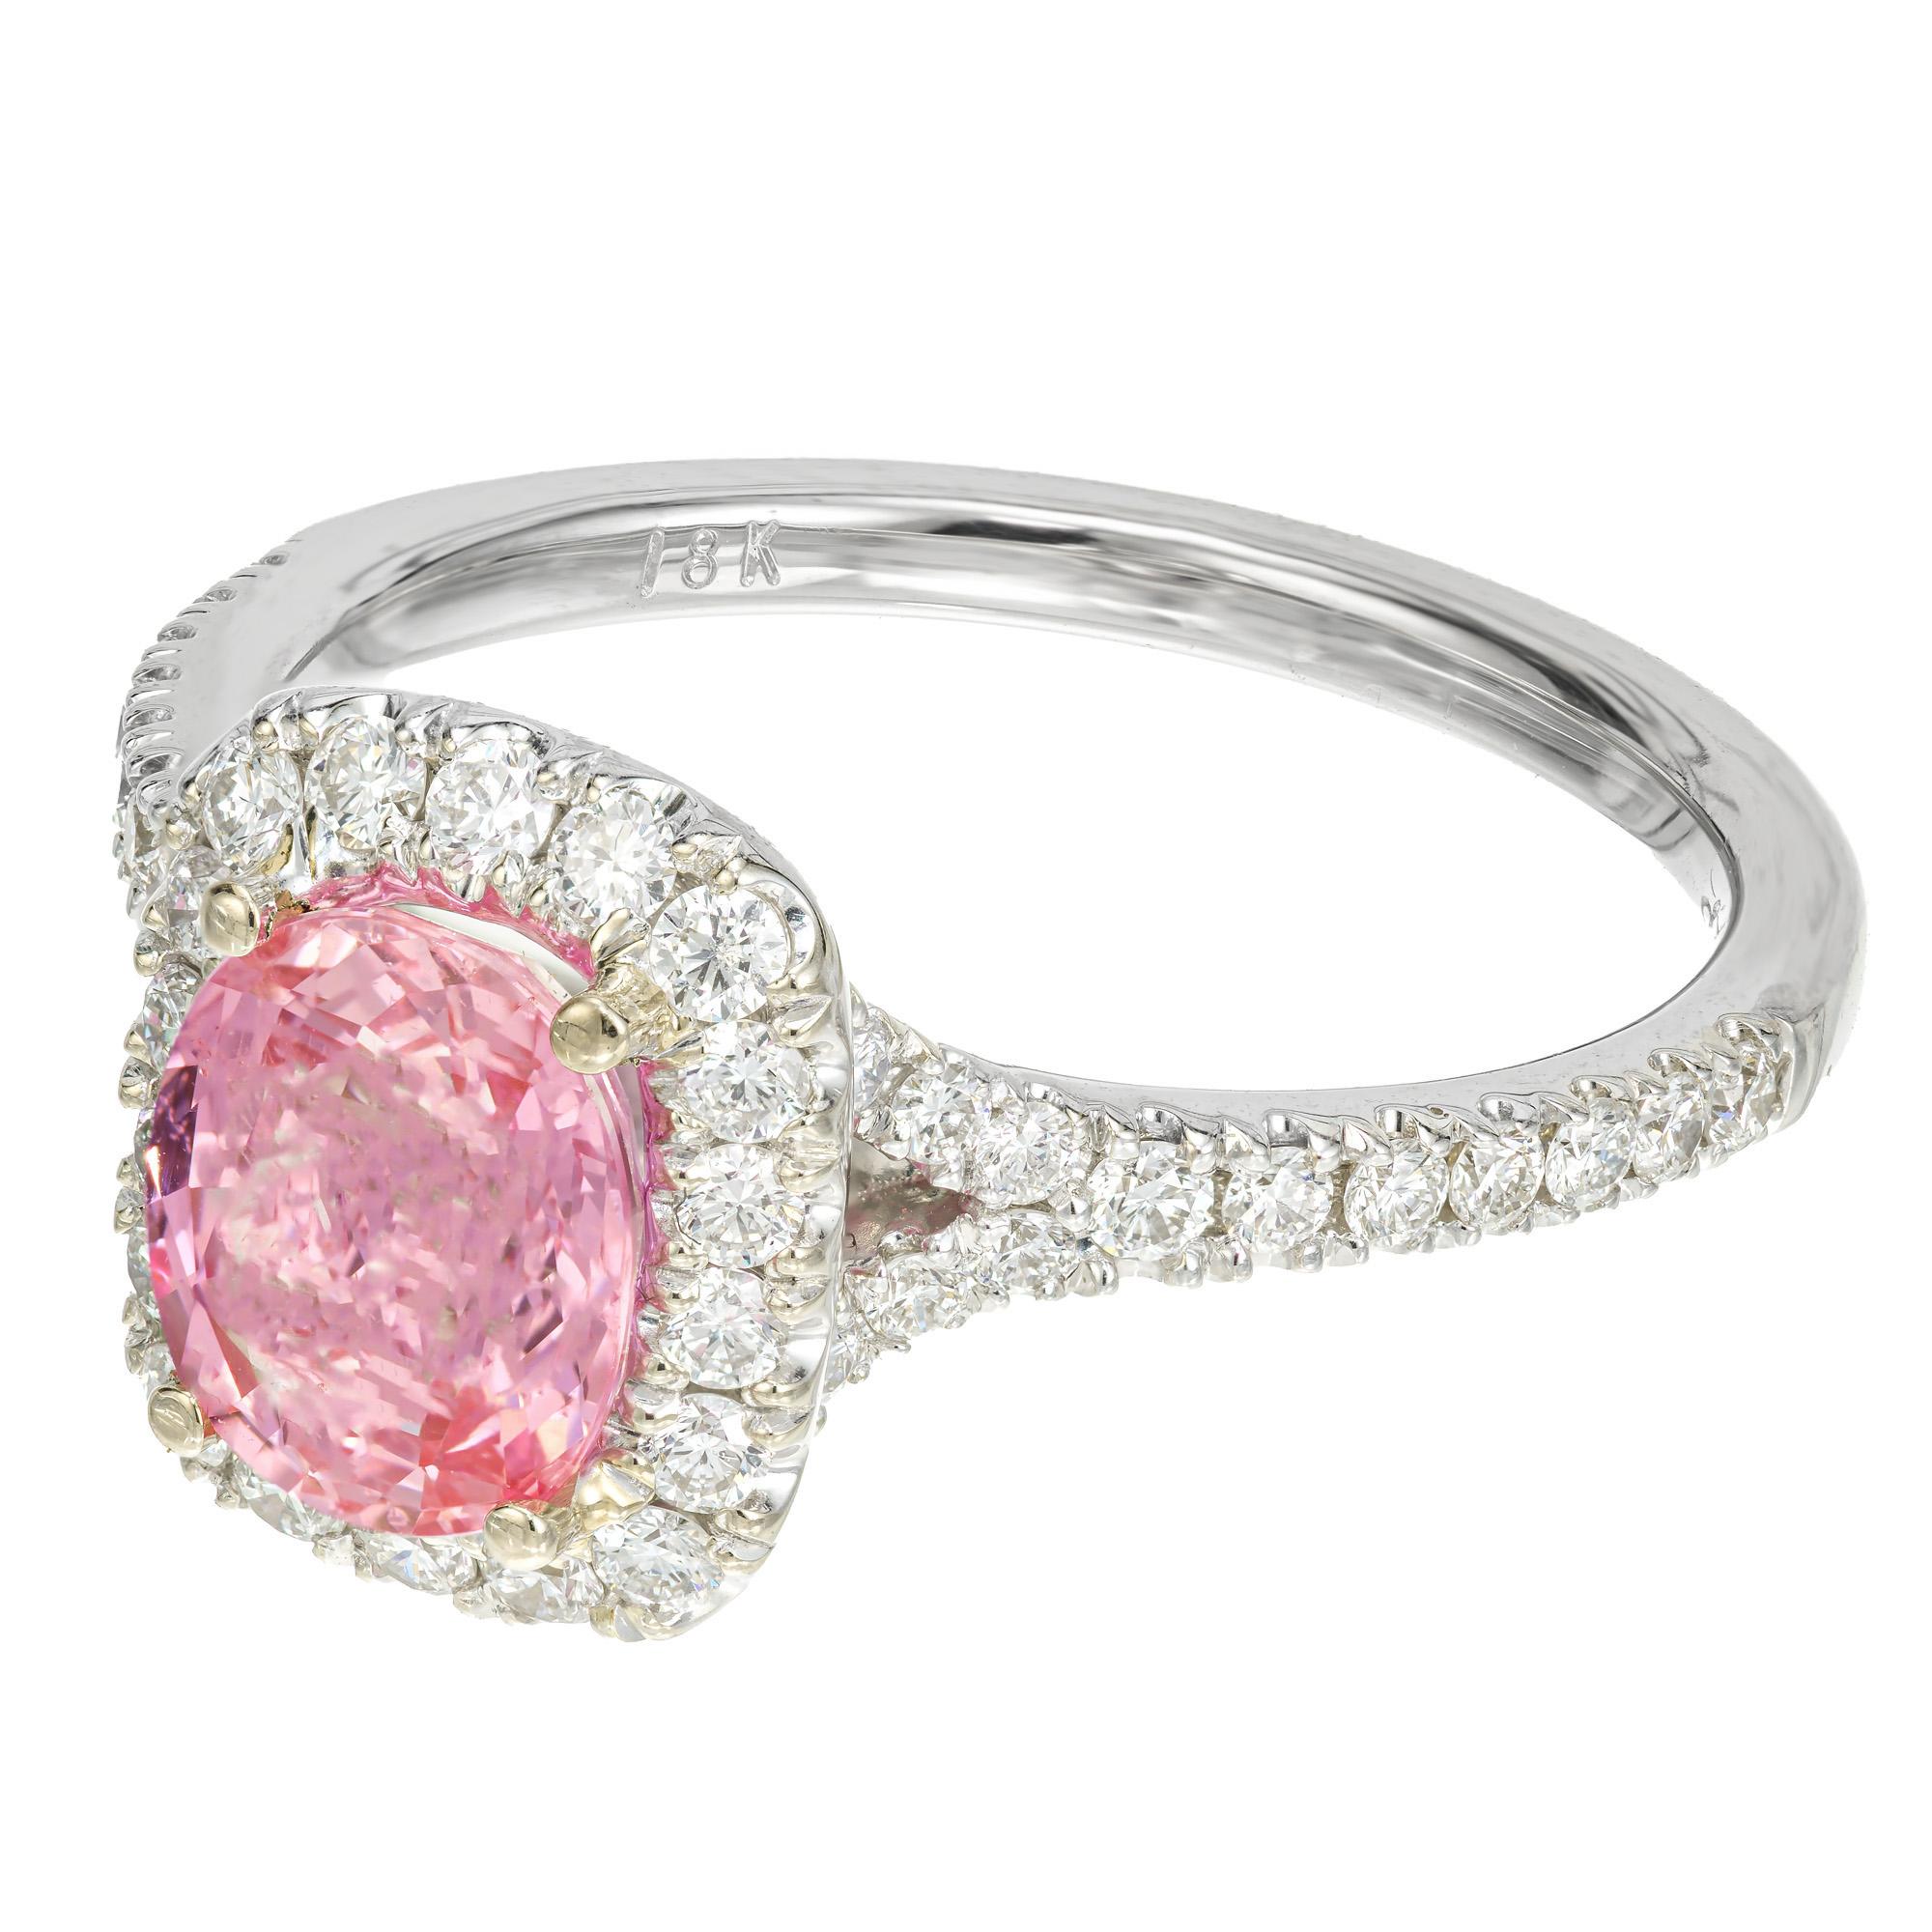 Hot pink natural no heat oval pink Sapphire and diamond engagement ring. GIA certified oval center sapphire with 44 round cut accent diamonds in a custom made halo 18k white gold setting from the Peter Suchy Workshop.

1 oval bright pink natural